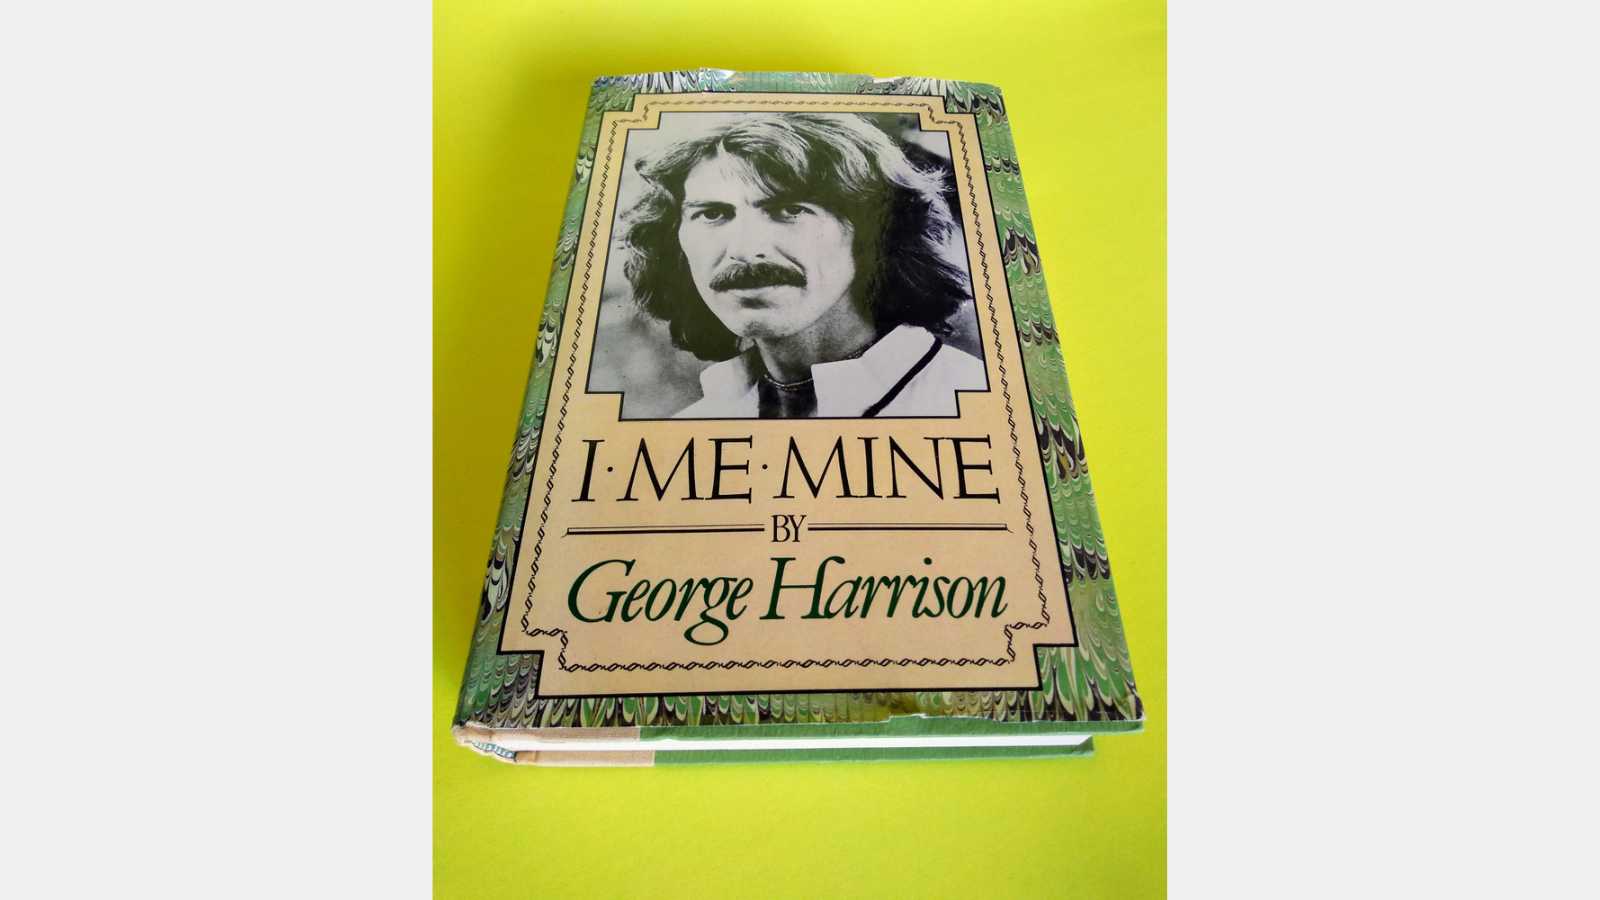 Los Angeles - March 25, 2019: Pages from the book "I, Me, Mine" by Beatle George Harrison show original hand-written notes of song lyrics